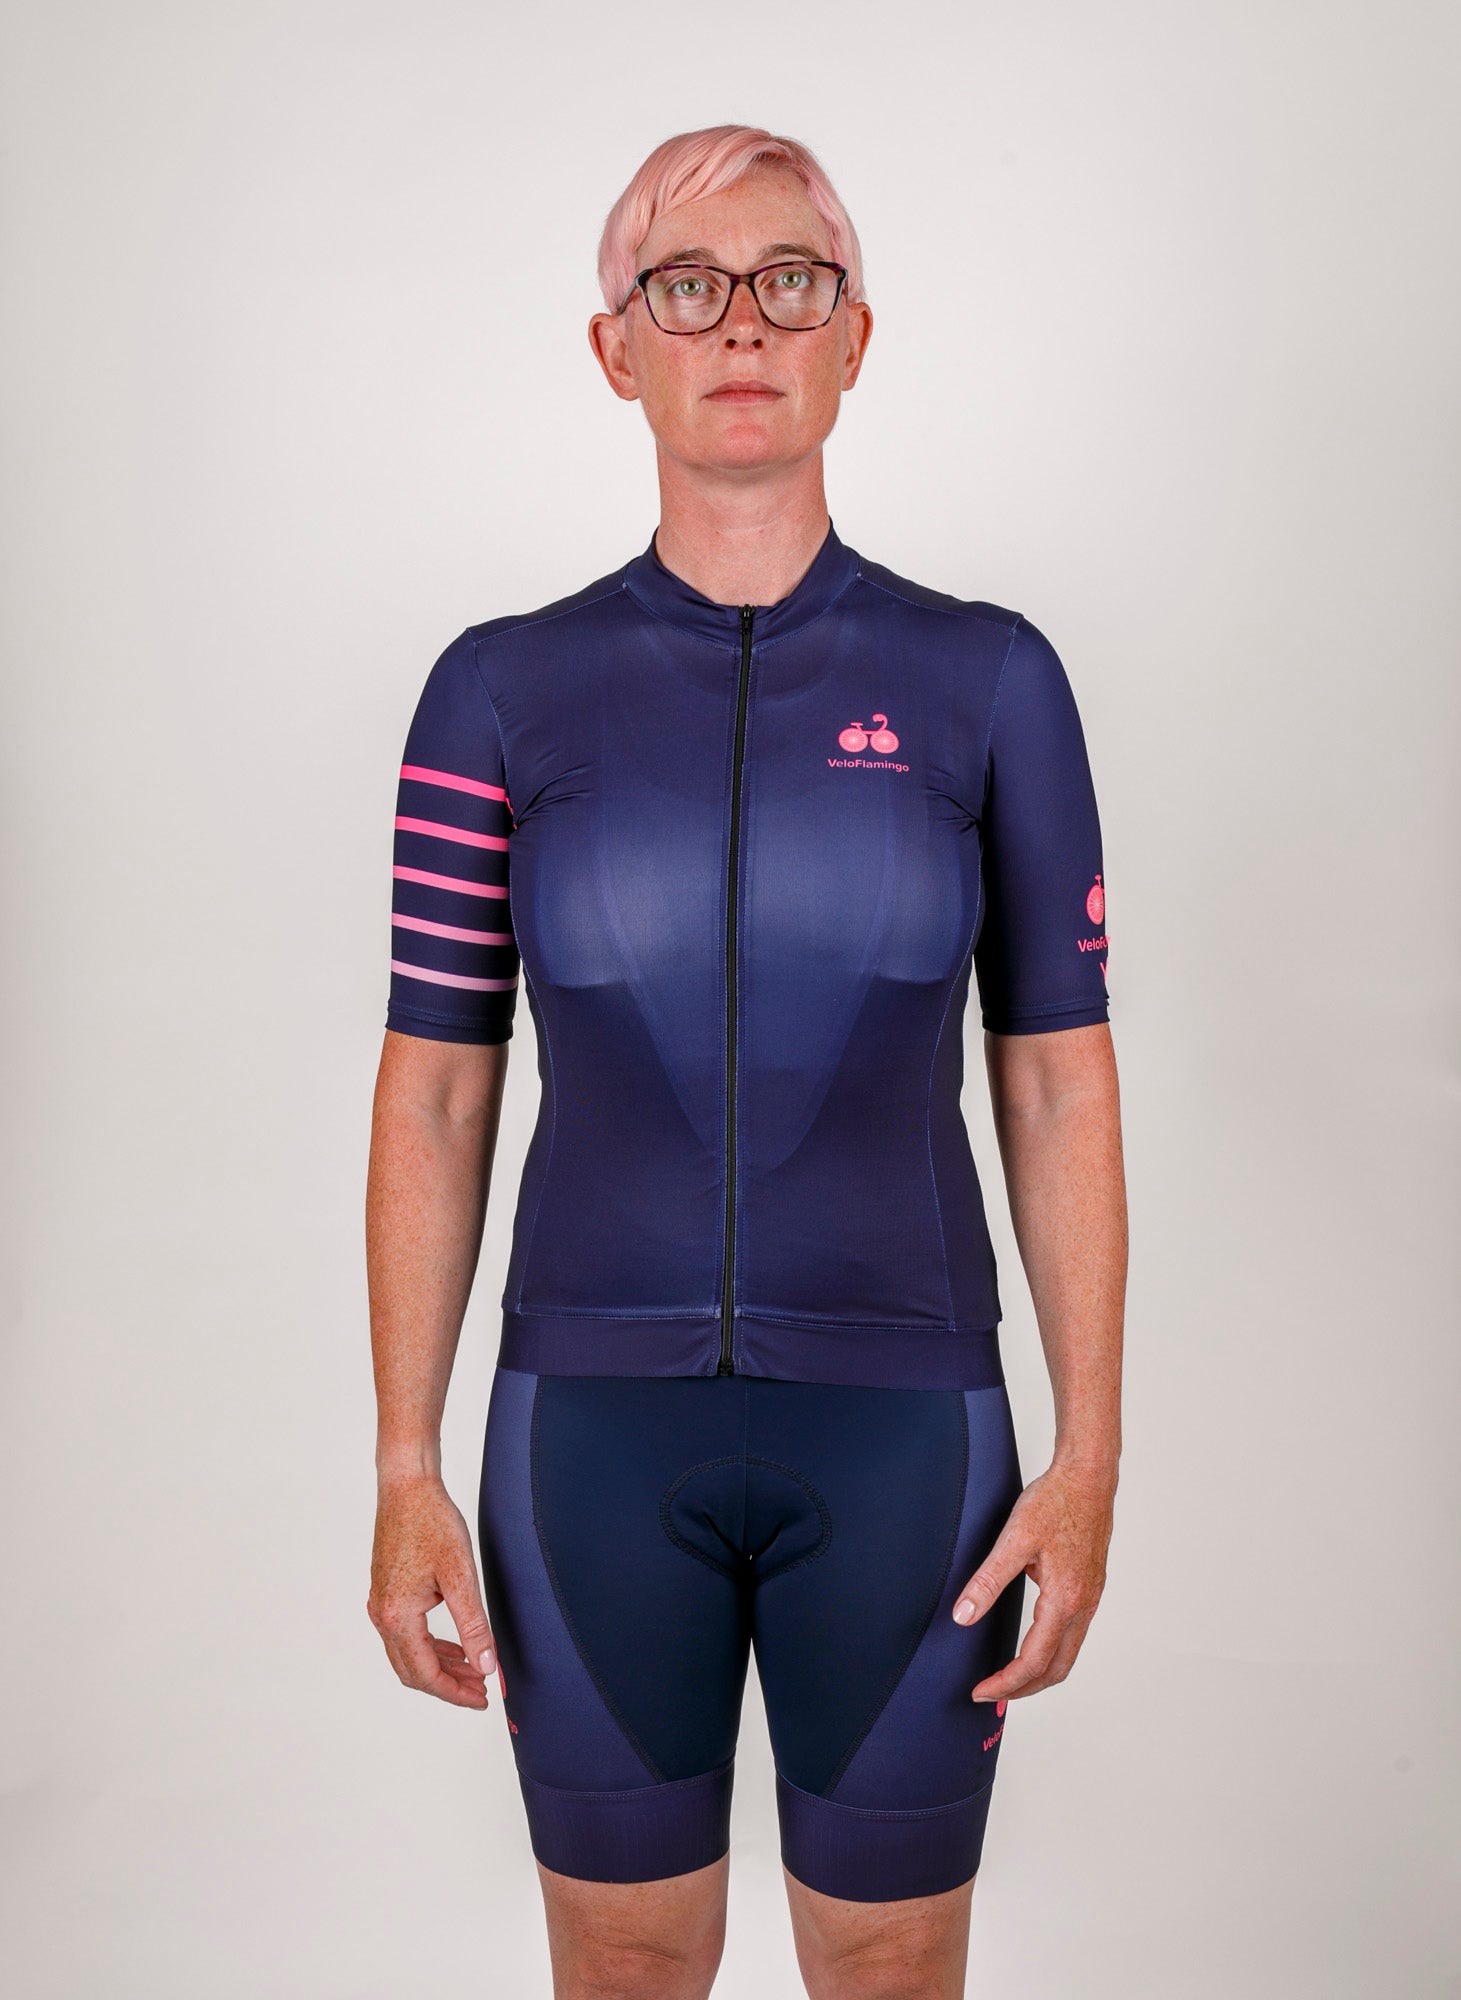 Indy Women's Cycling Jersey